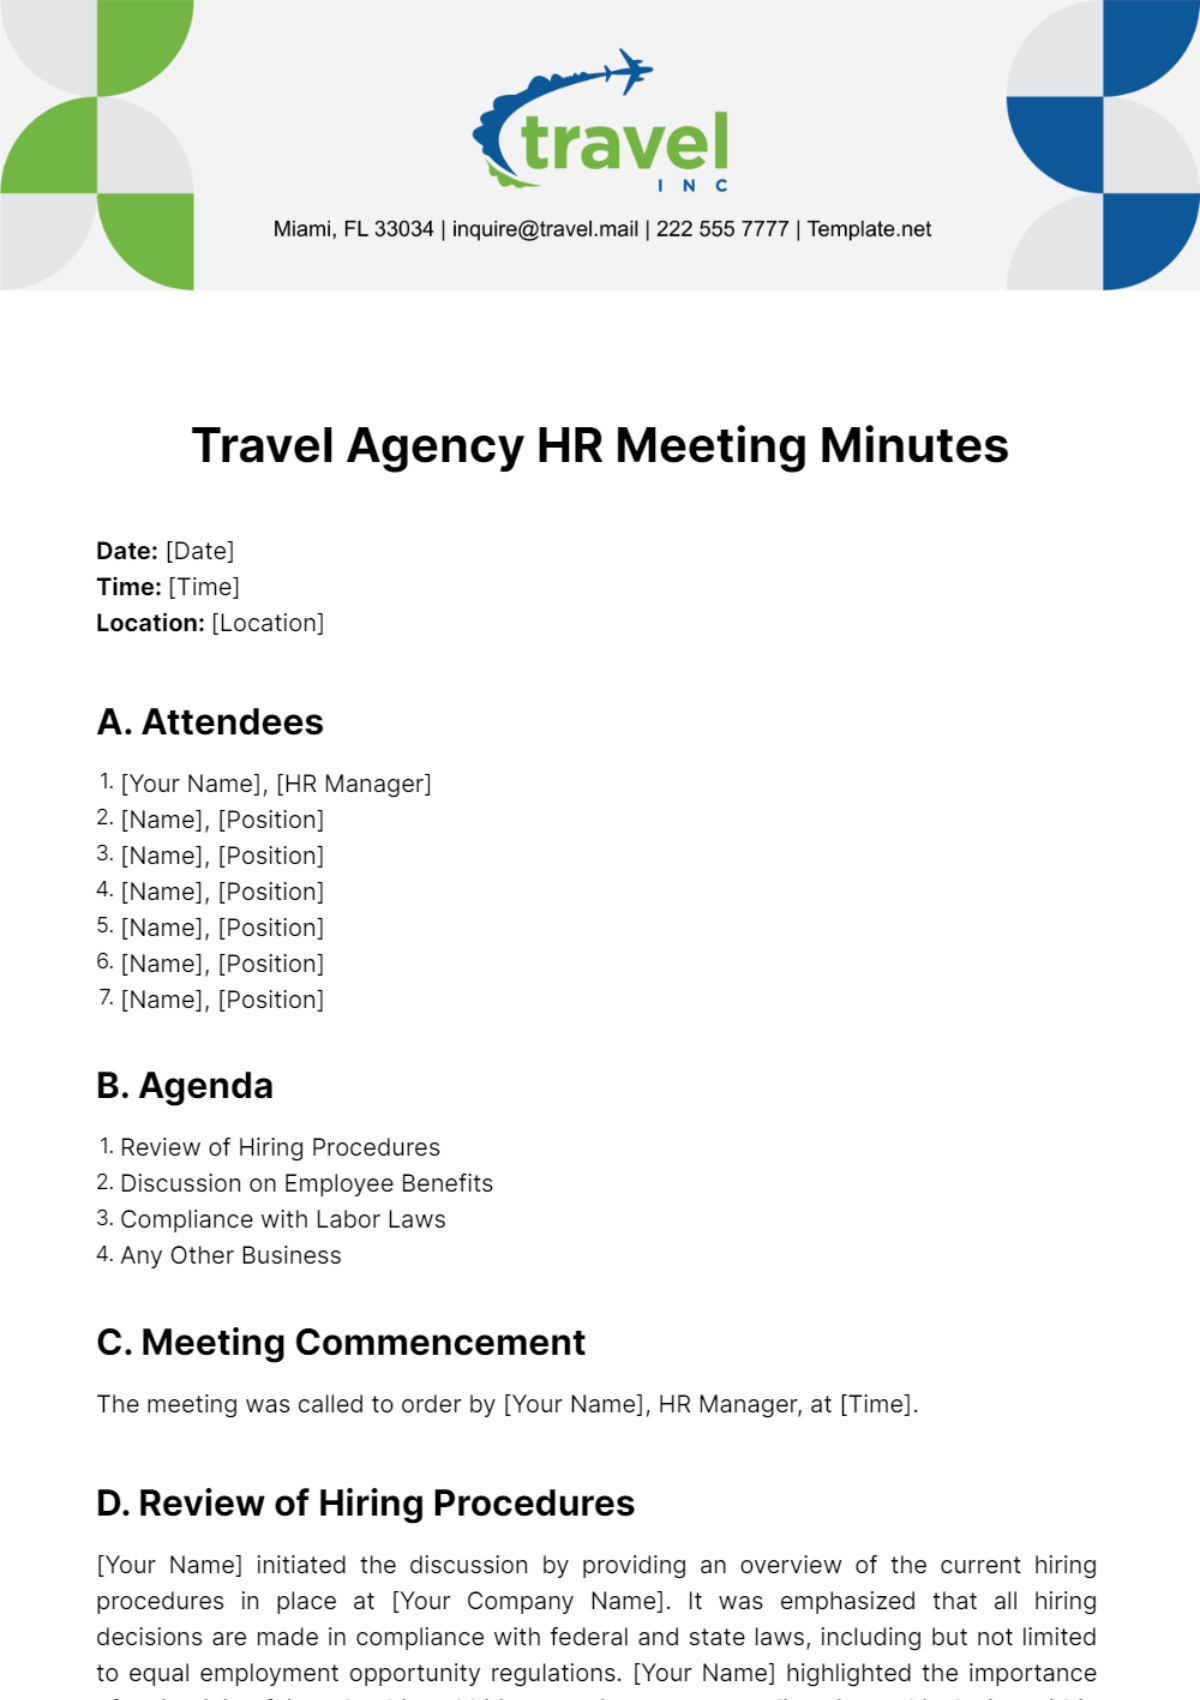 Travel Agency HR Meeting Minutes Template